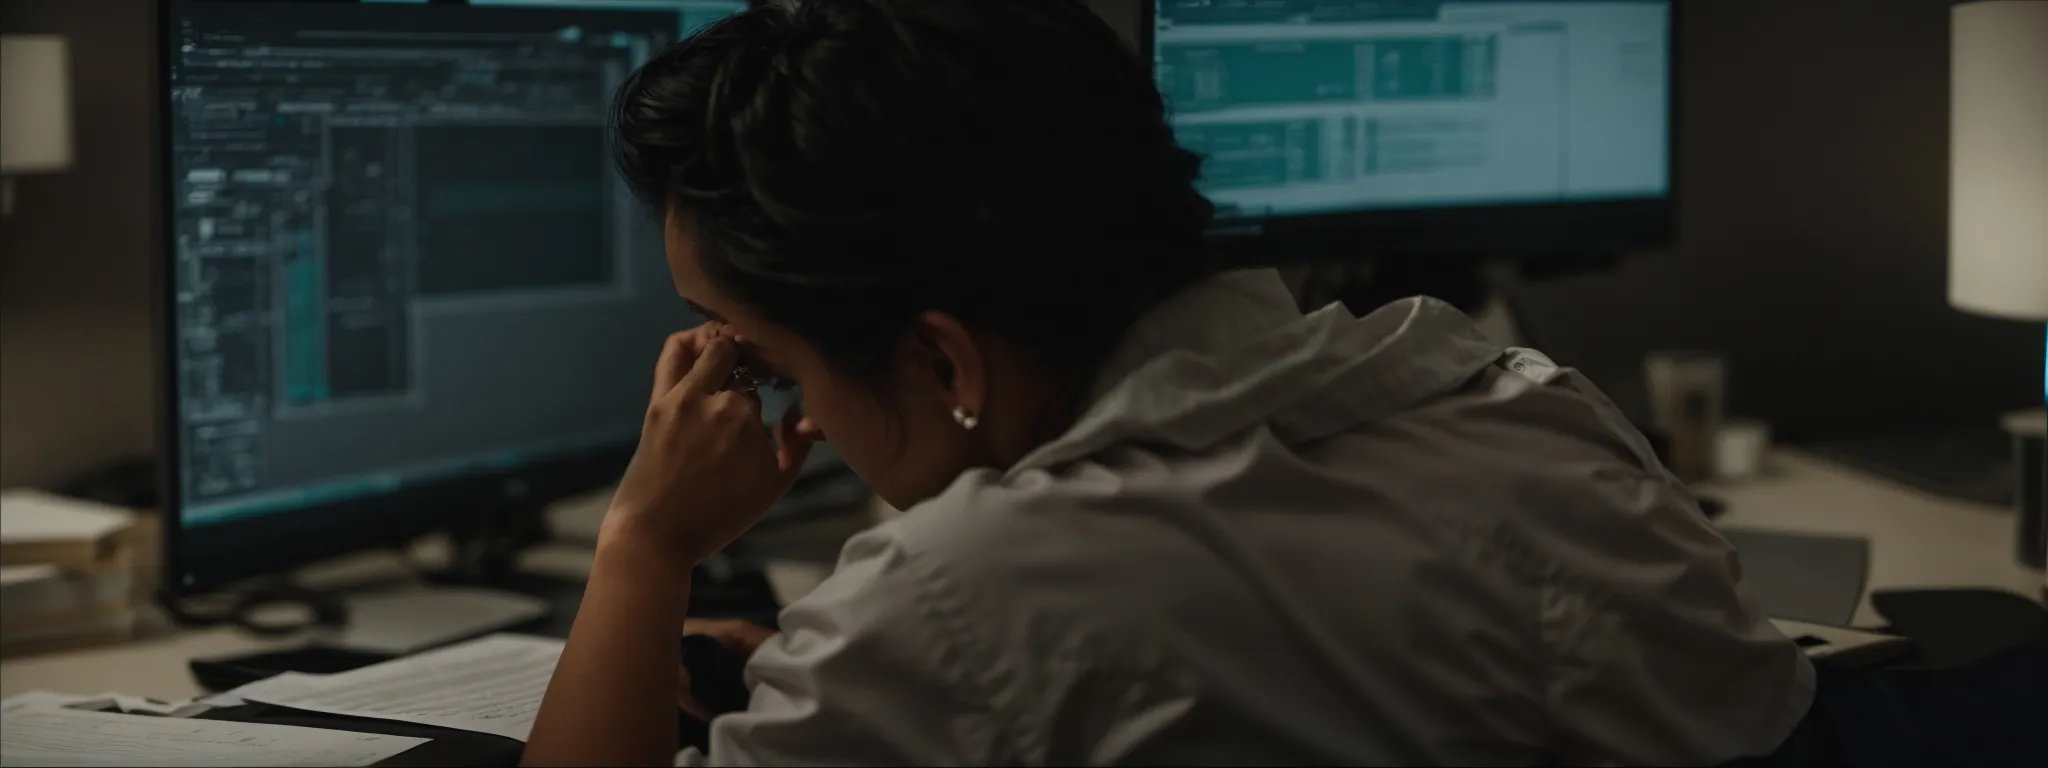 a person sitting at a computer, reviewing a document on the screen with a look of concentration as they edit text.